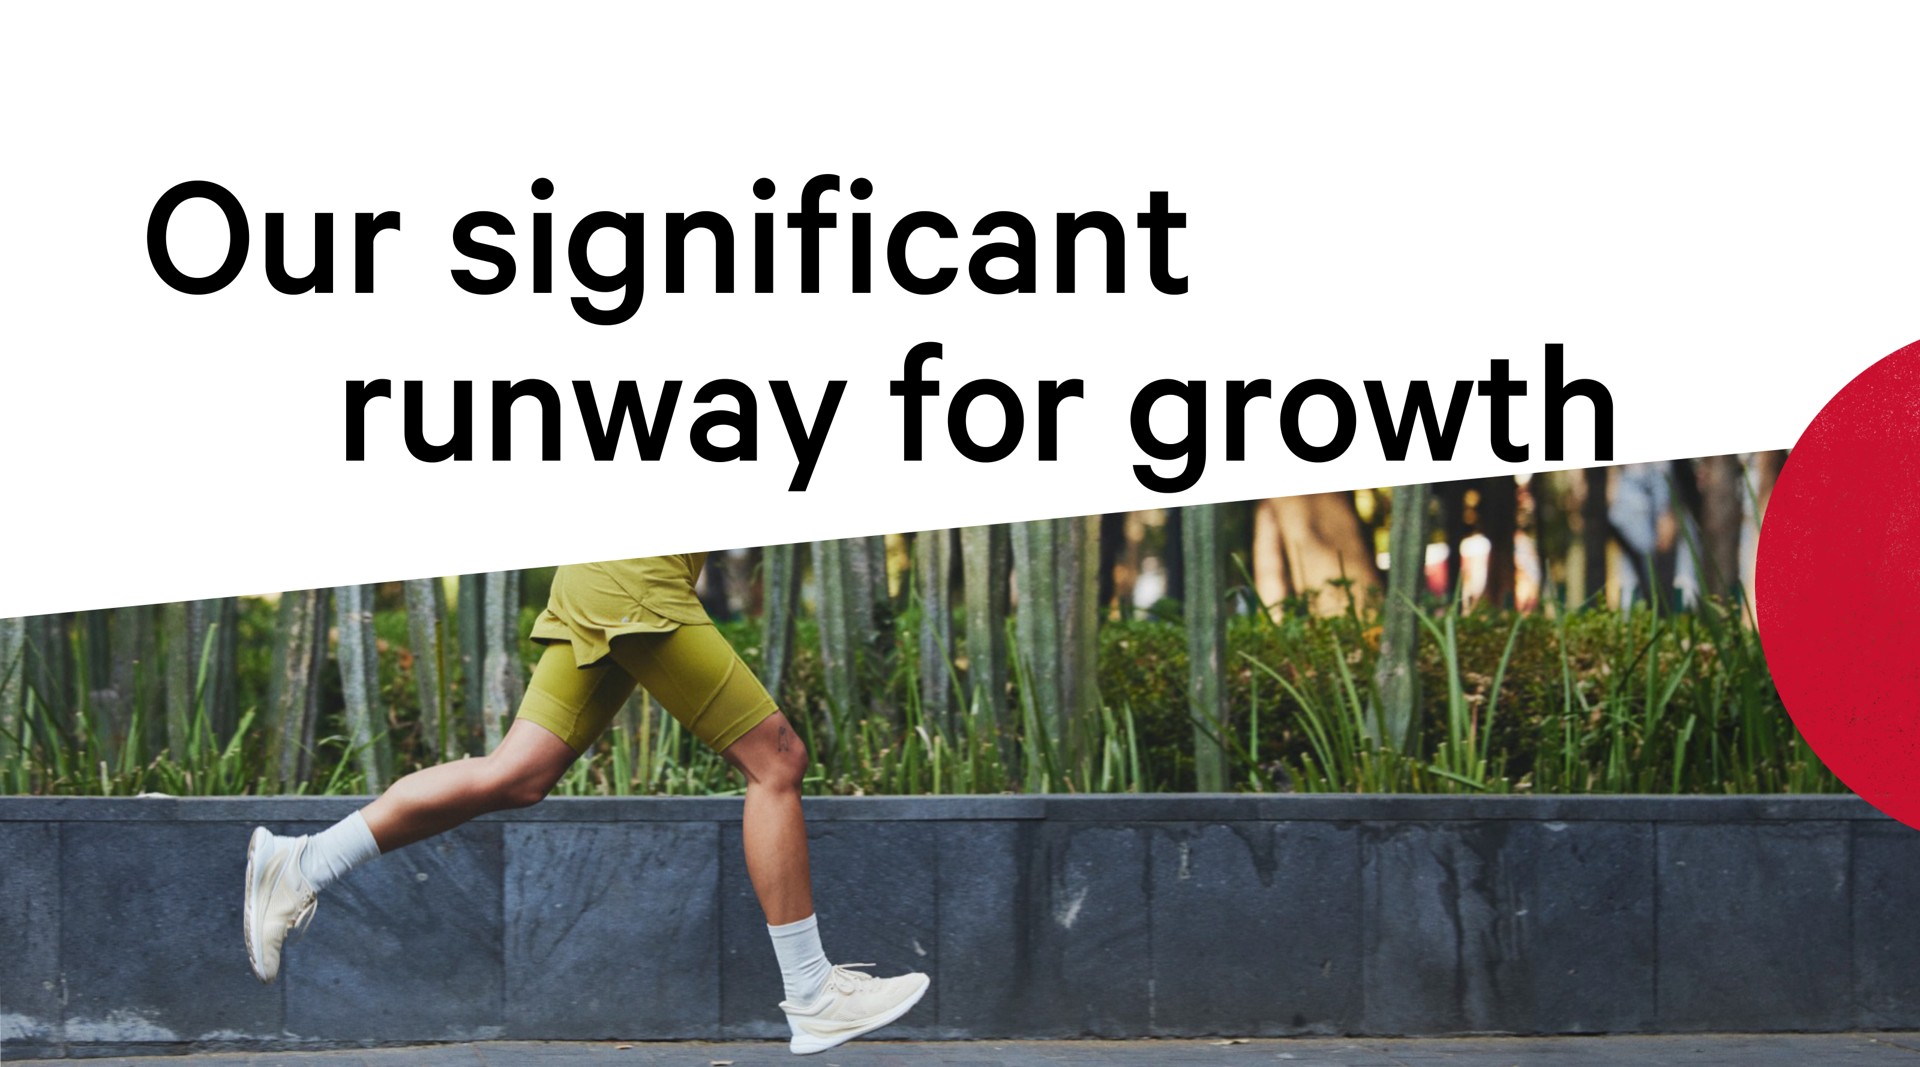 our significant runway for growth cot mae | Lululemon